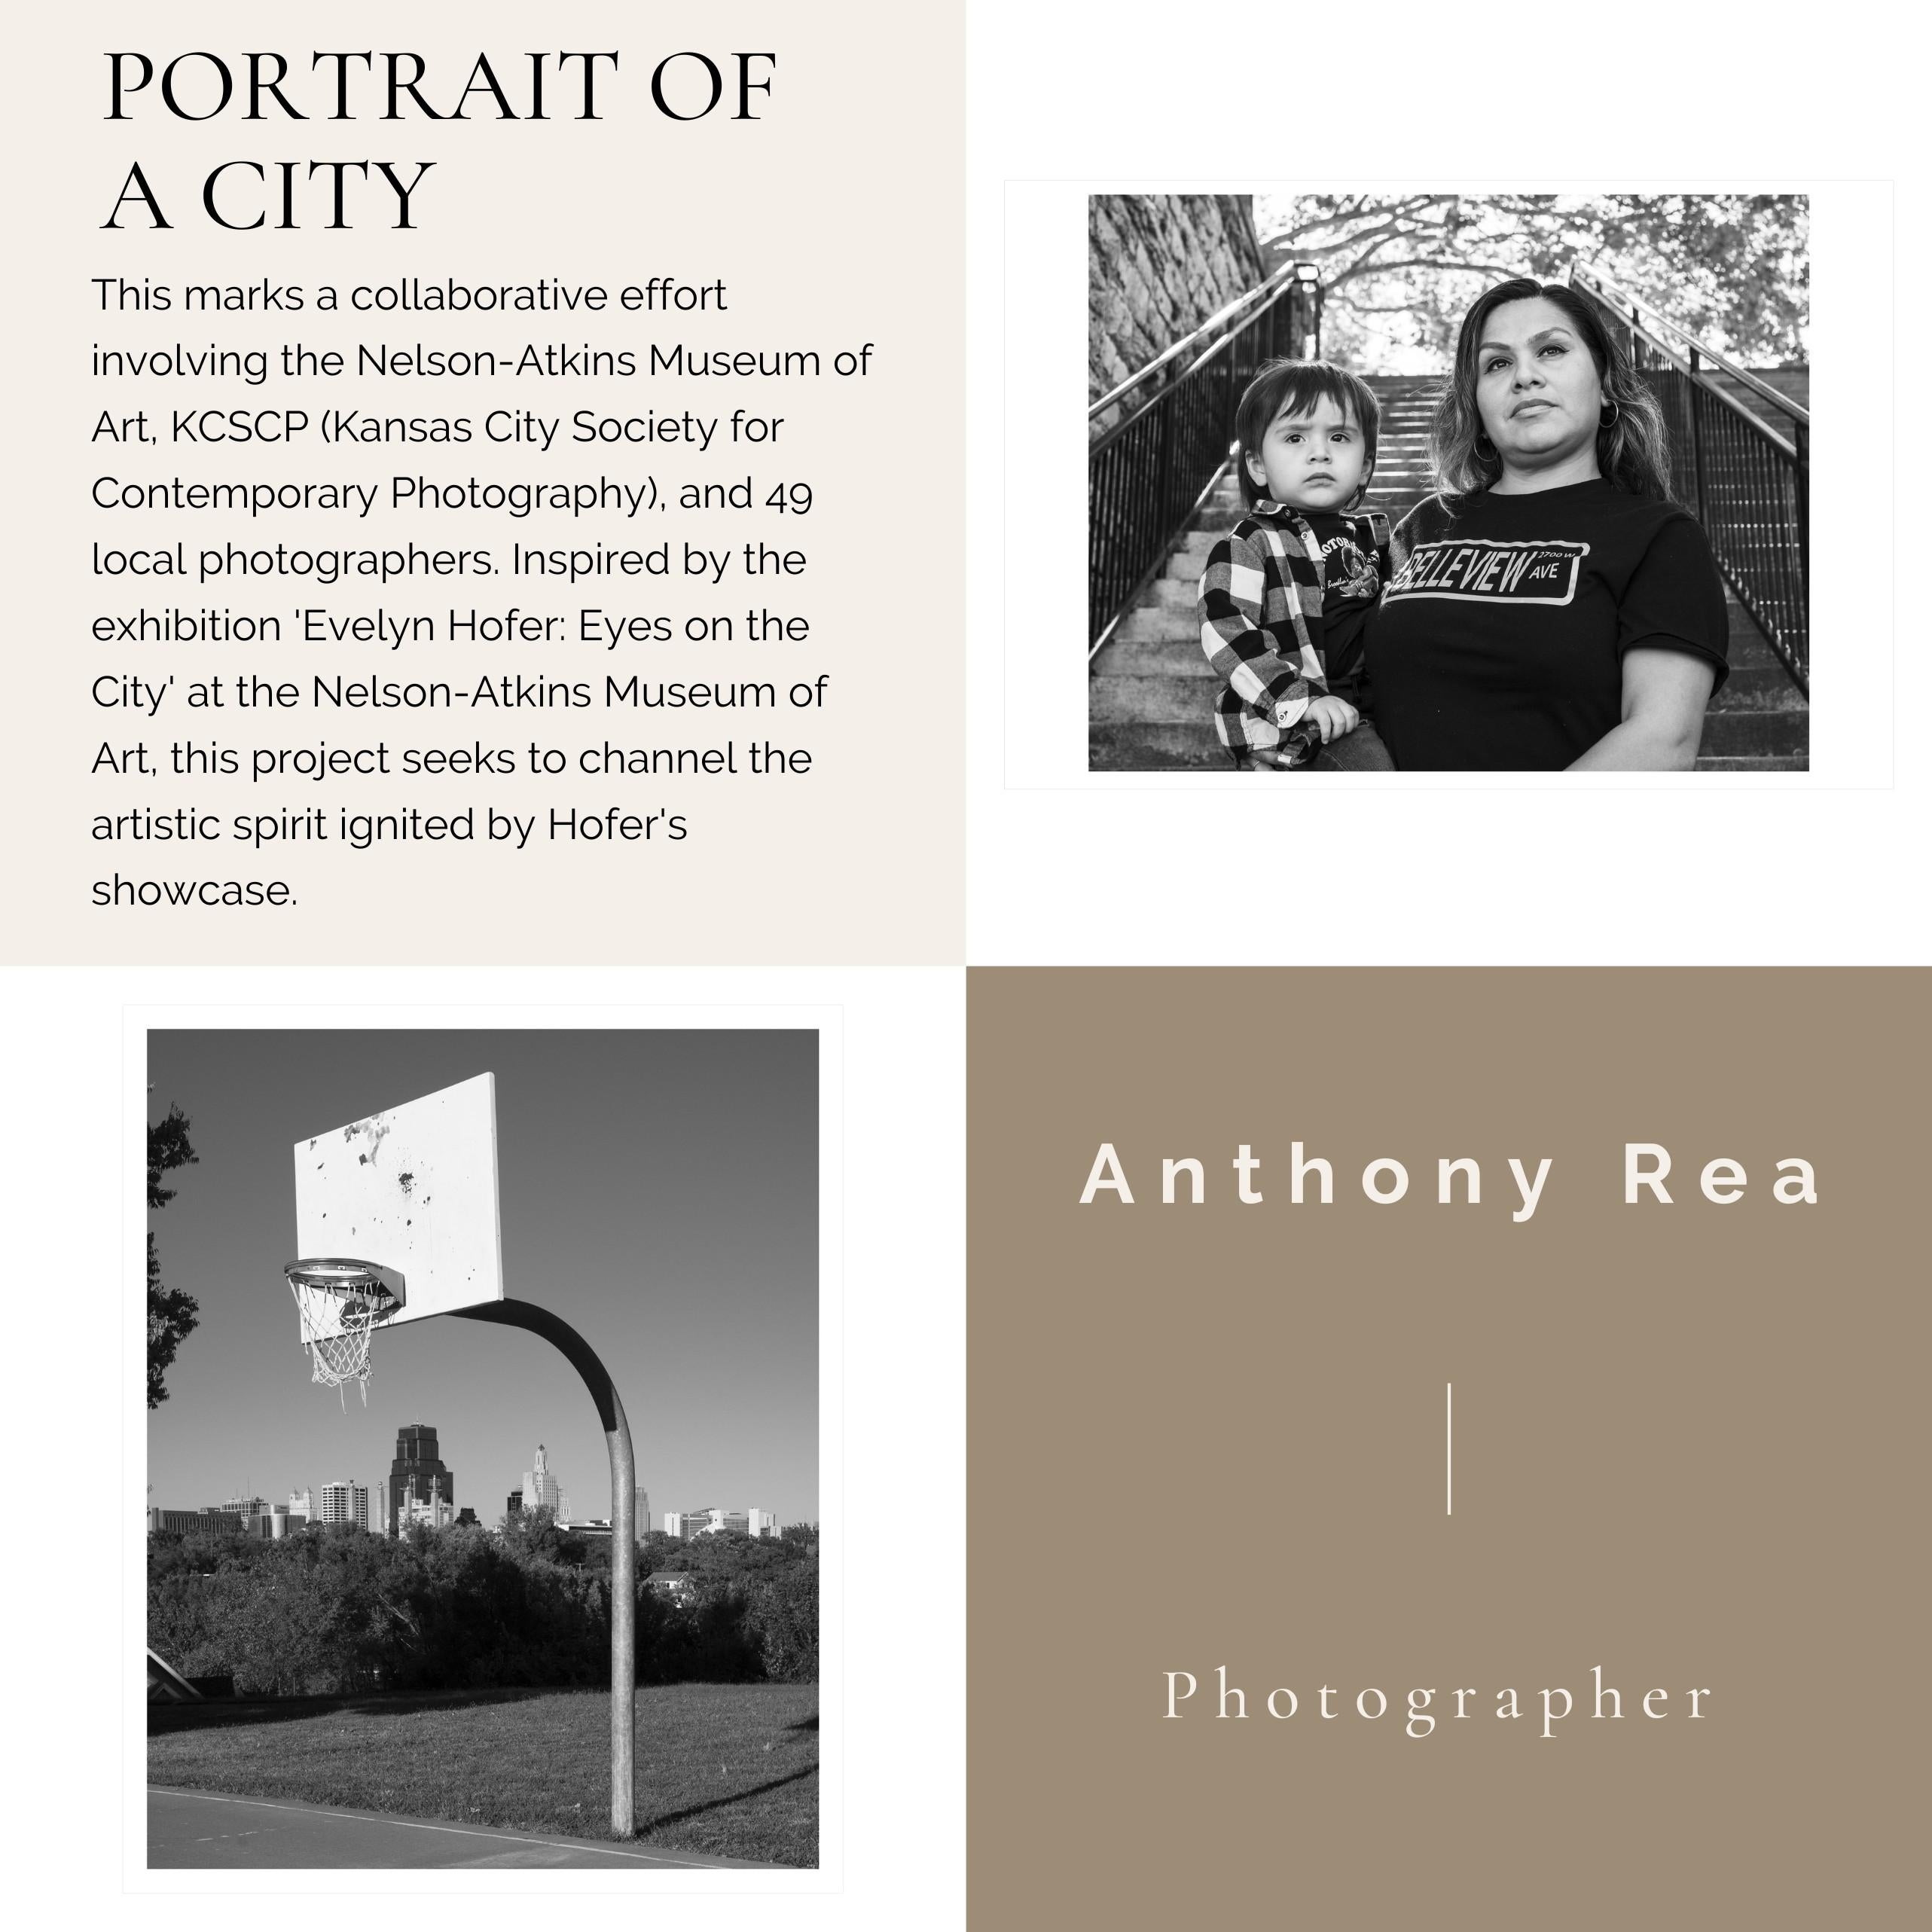 Anthony Rea
Observation Park
Year: 2024
Archival Pigment Print on
Hahnemuehle Baryta Rag
Framed Size: 13 x 13 x 0.25 inches
COA provided

*Ready to hang; matted and framed in a minimal black frame made from composite wood with standard plex

From